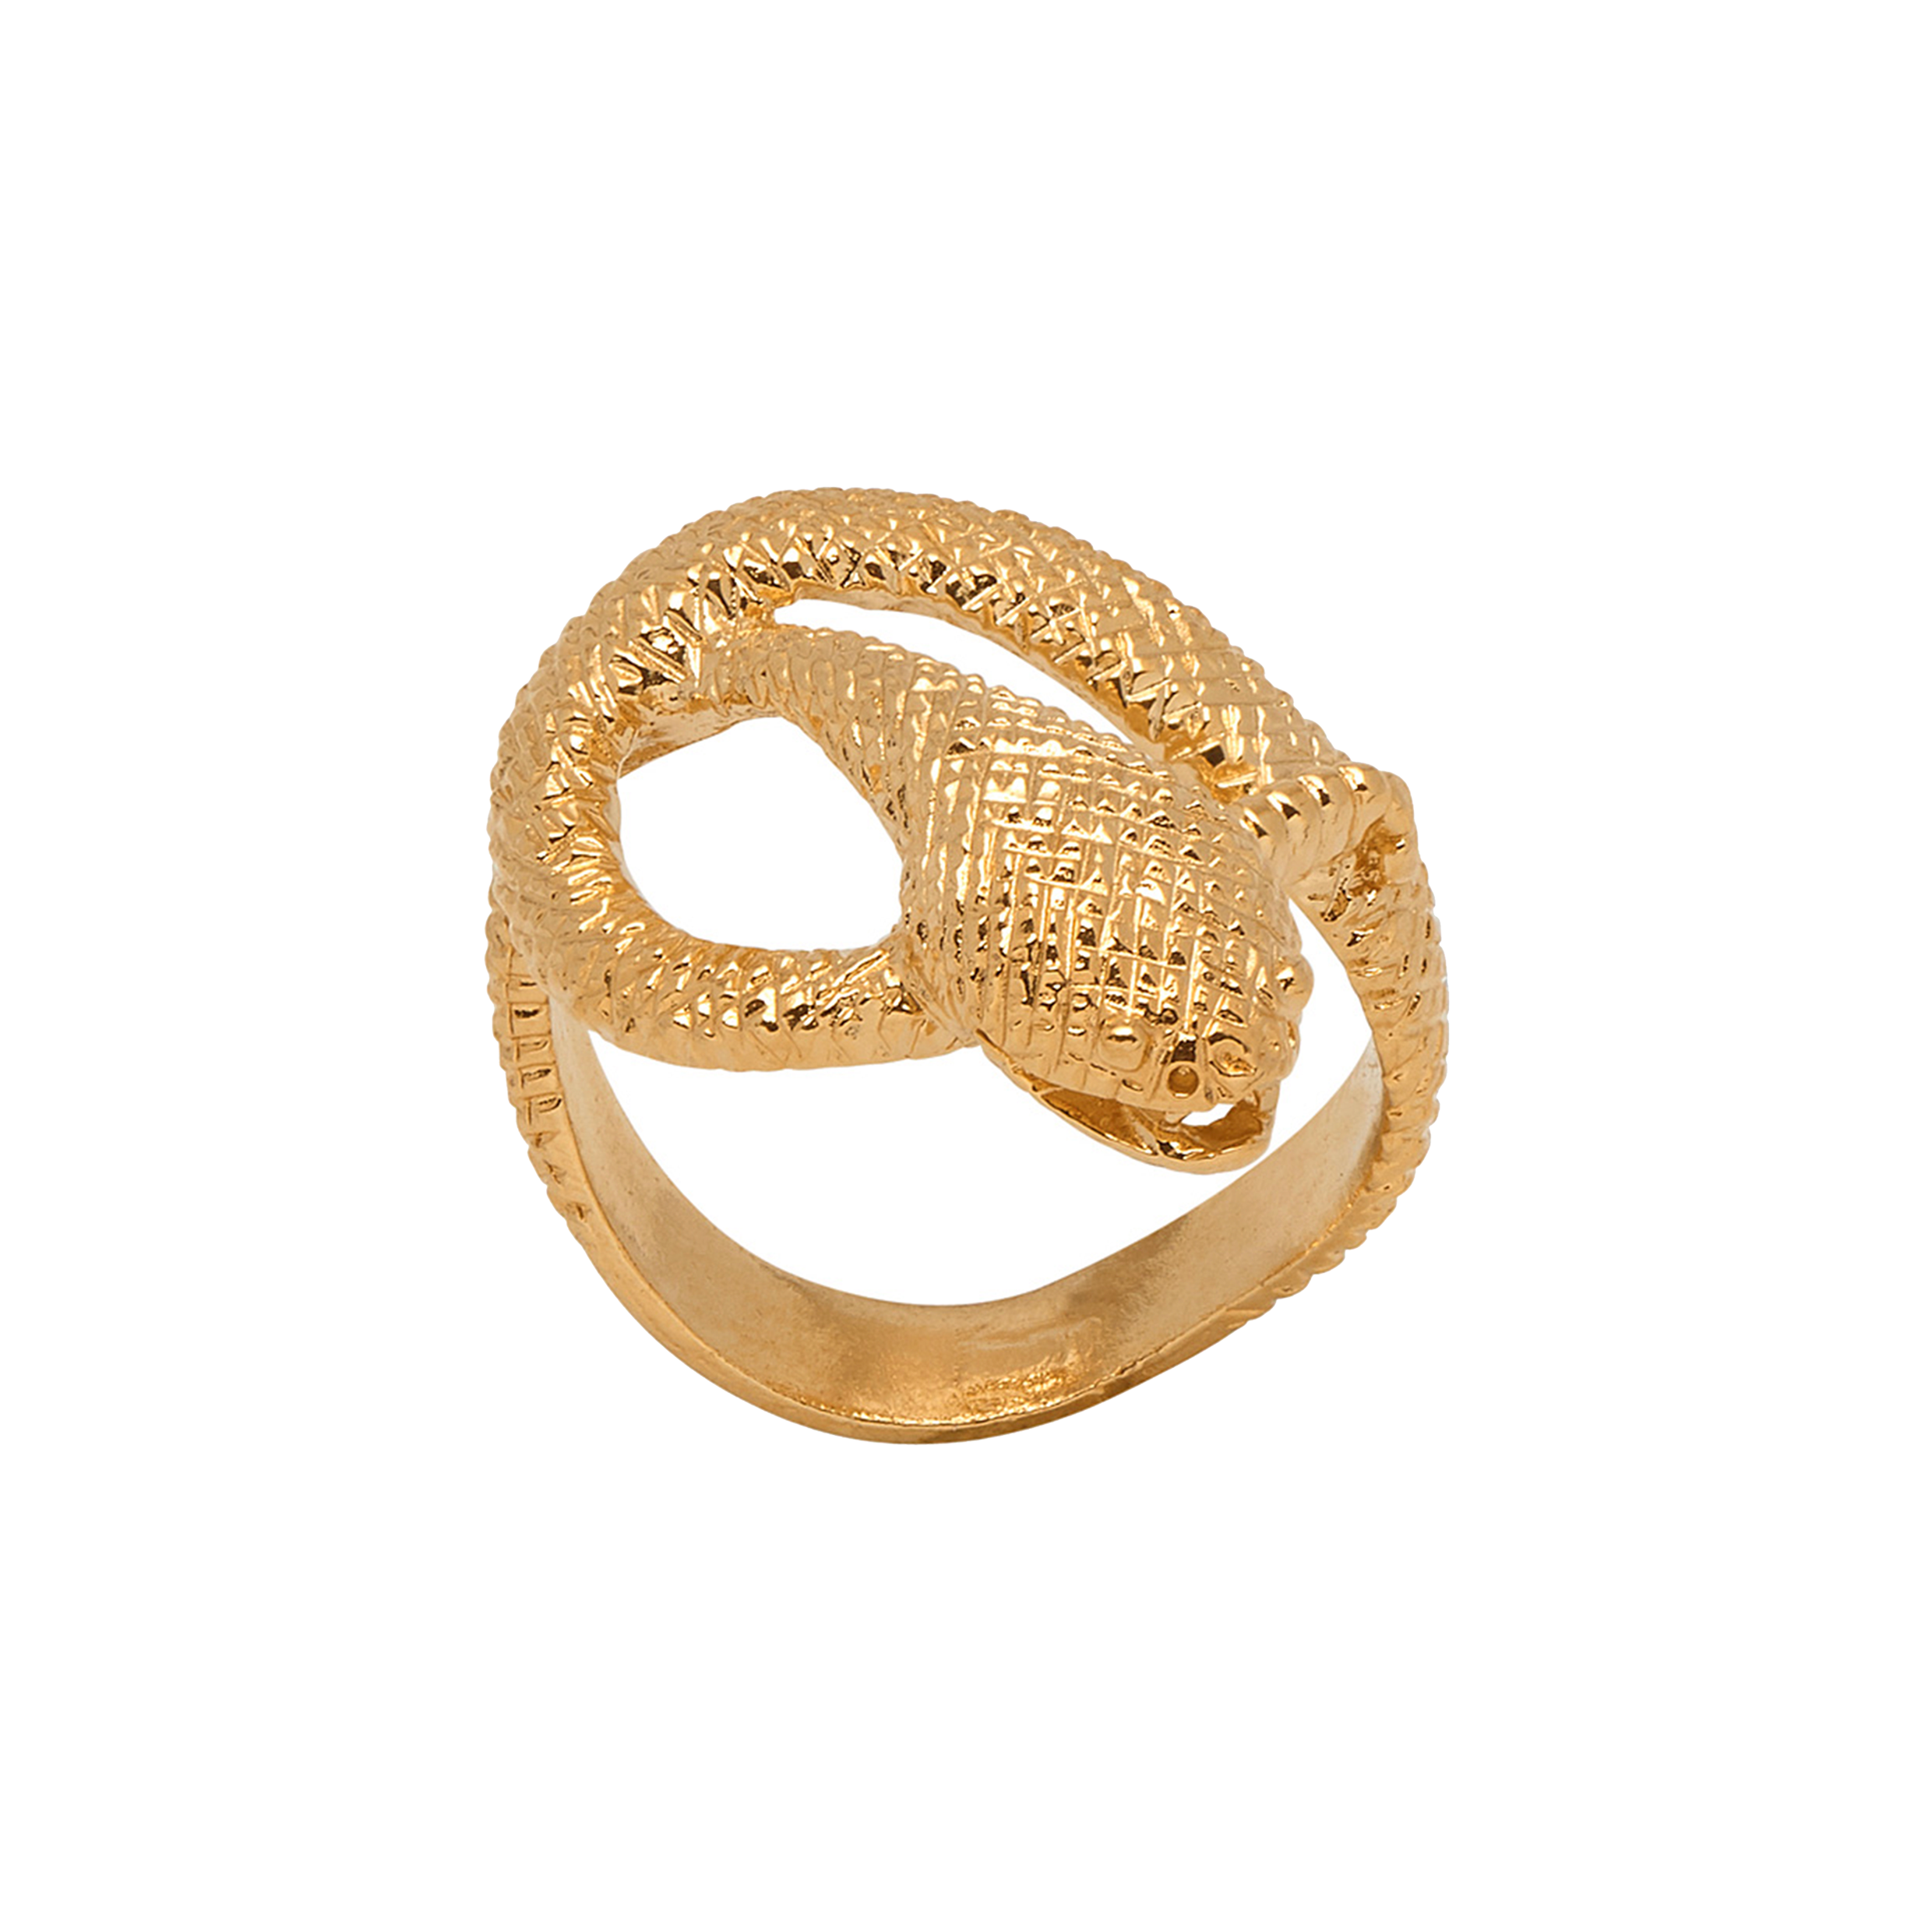 Large Snake Ring - Mirabelle Jewellery